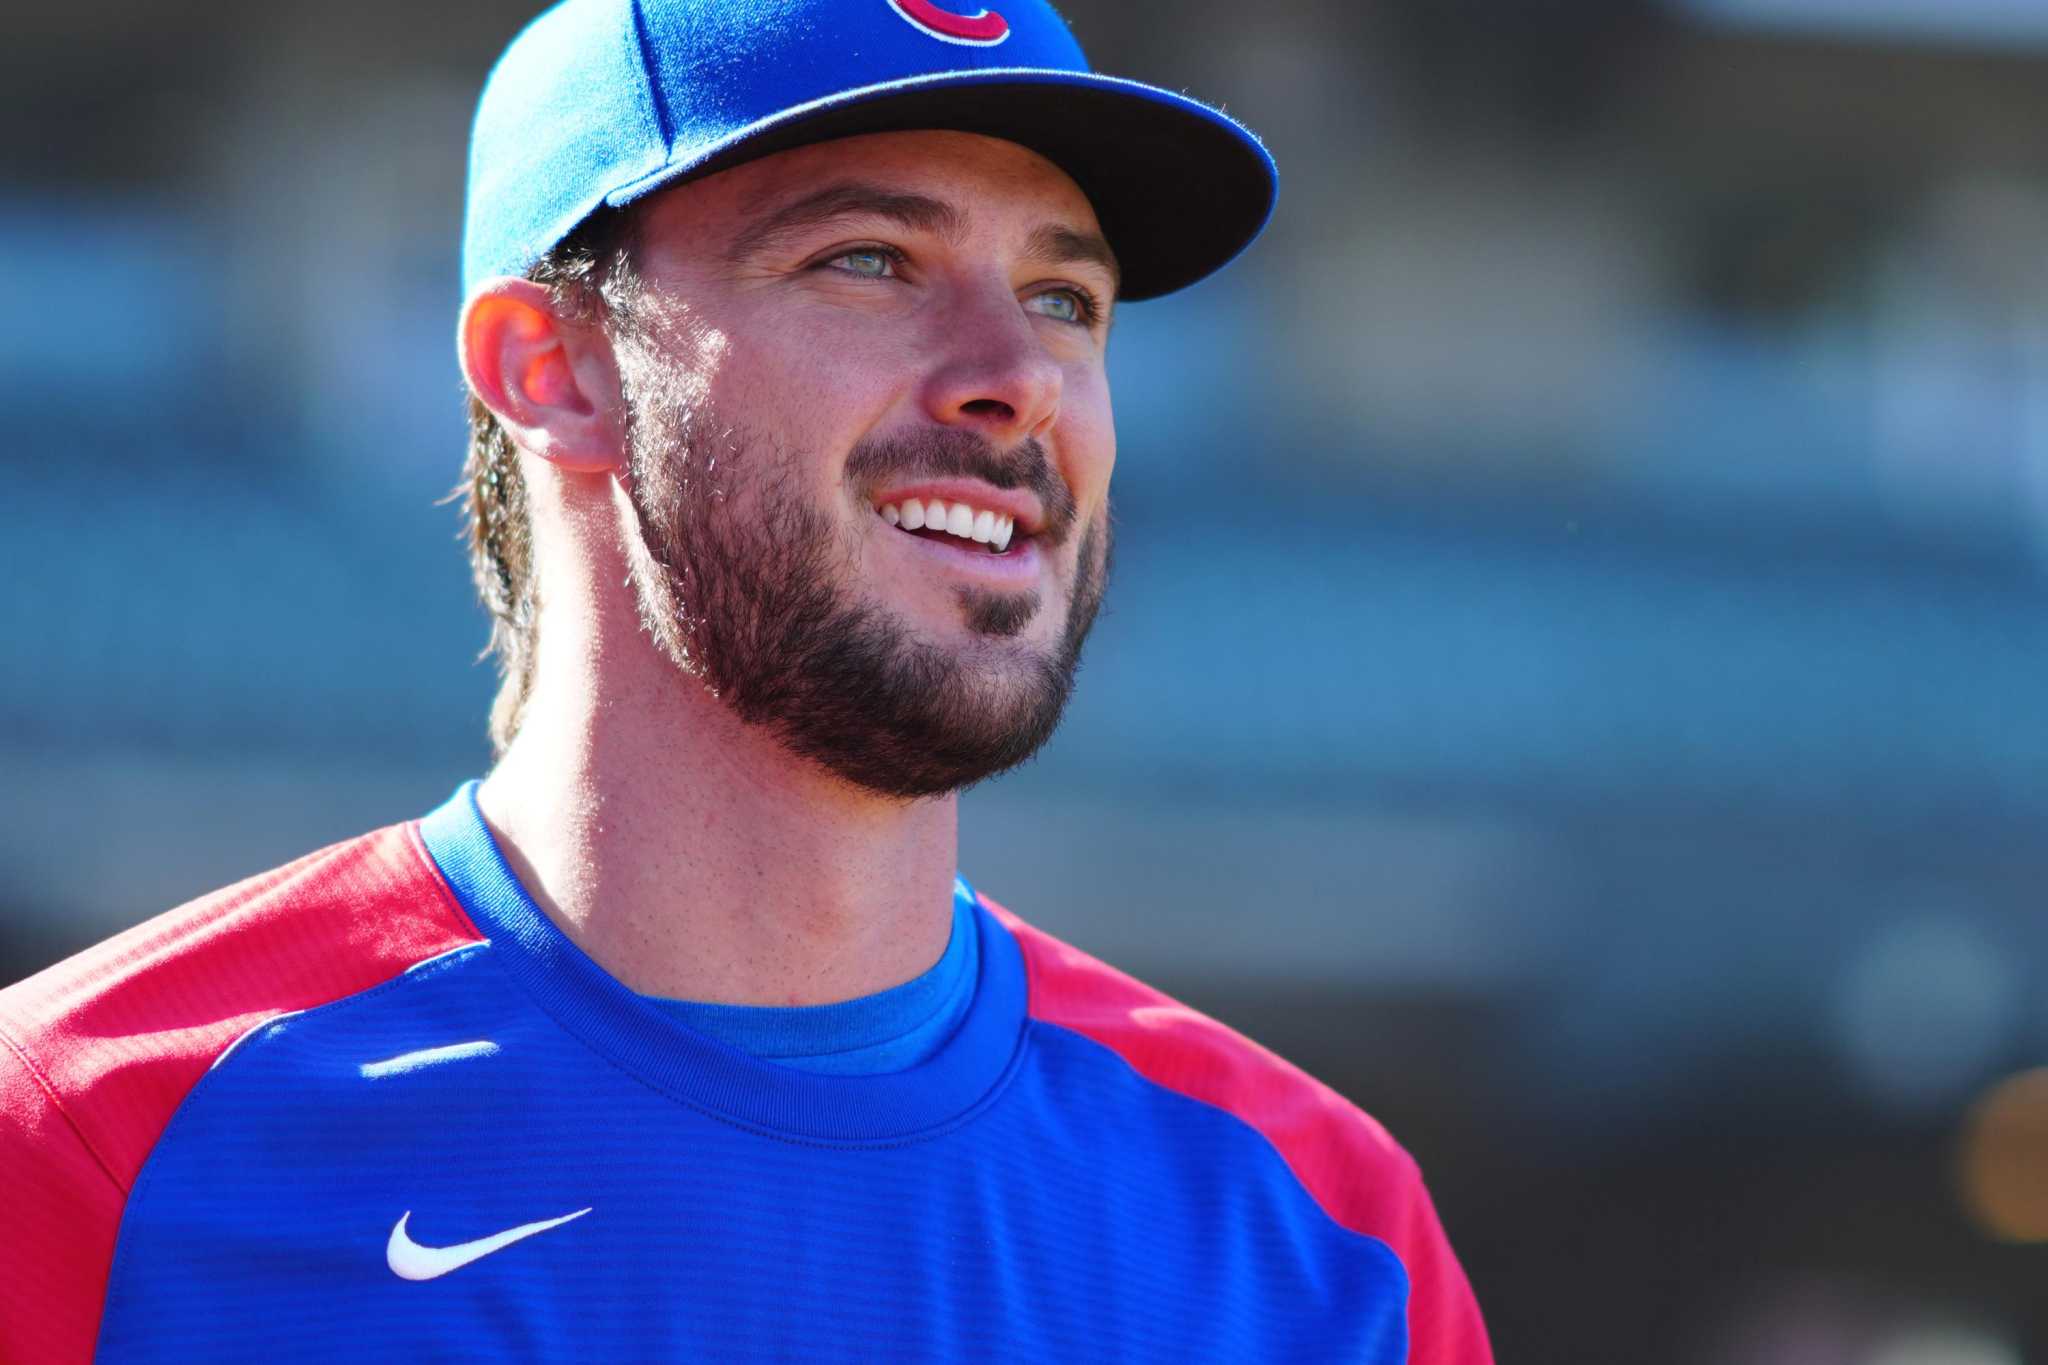 Kris Bryant to Giants in another MLB trade deadline blockbuster with Cubs